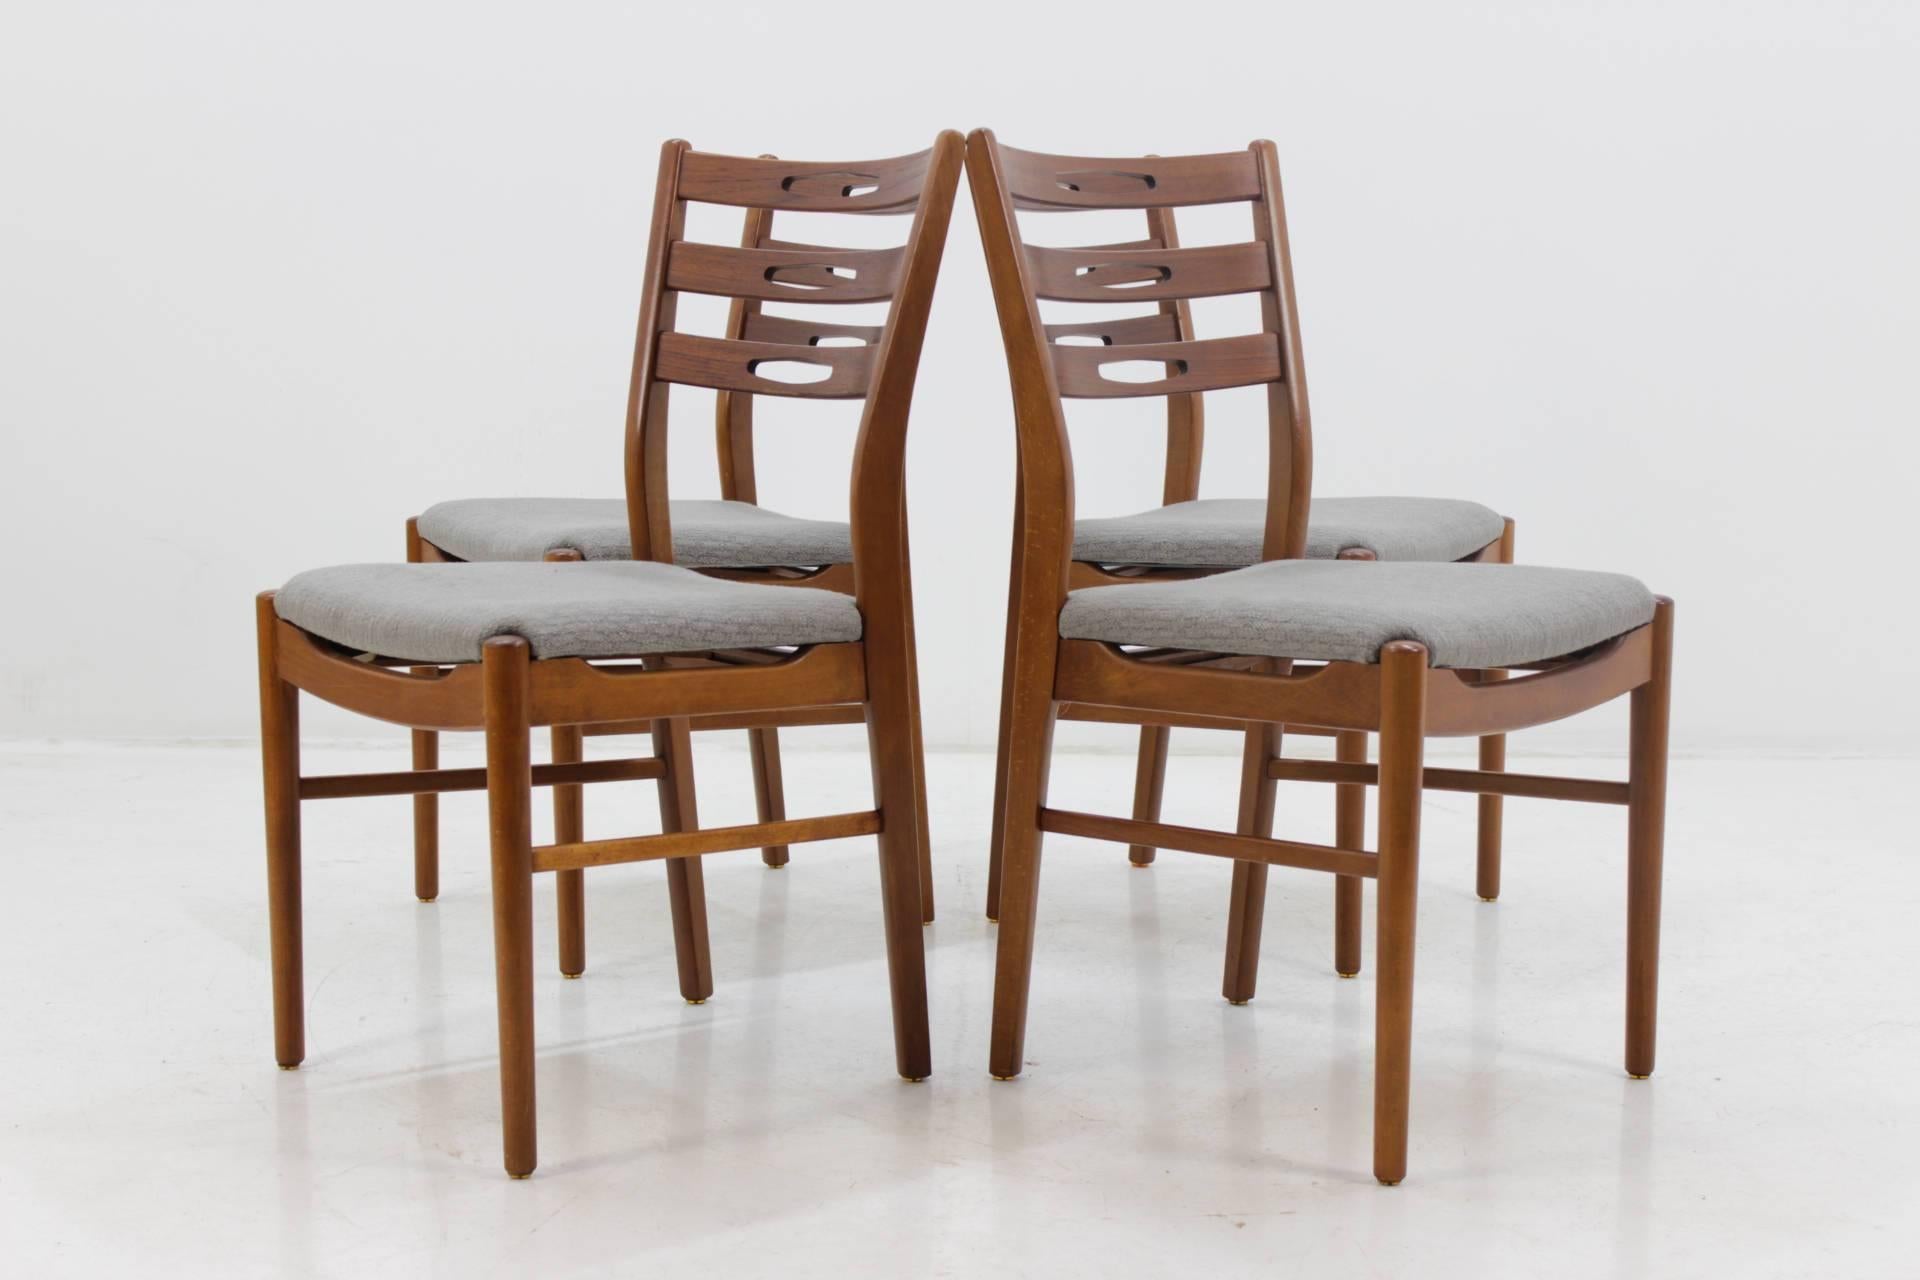 The frame of each one is made from solid teak wood. Newly upholstered. Partly renovated.